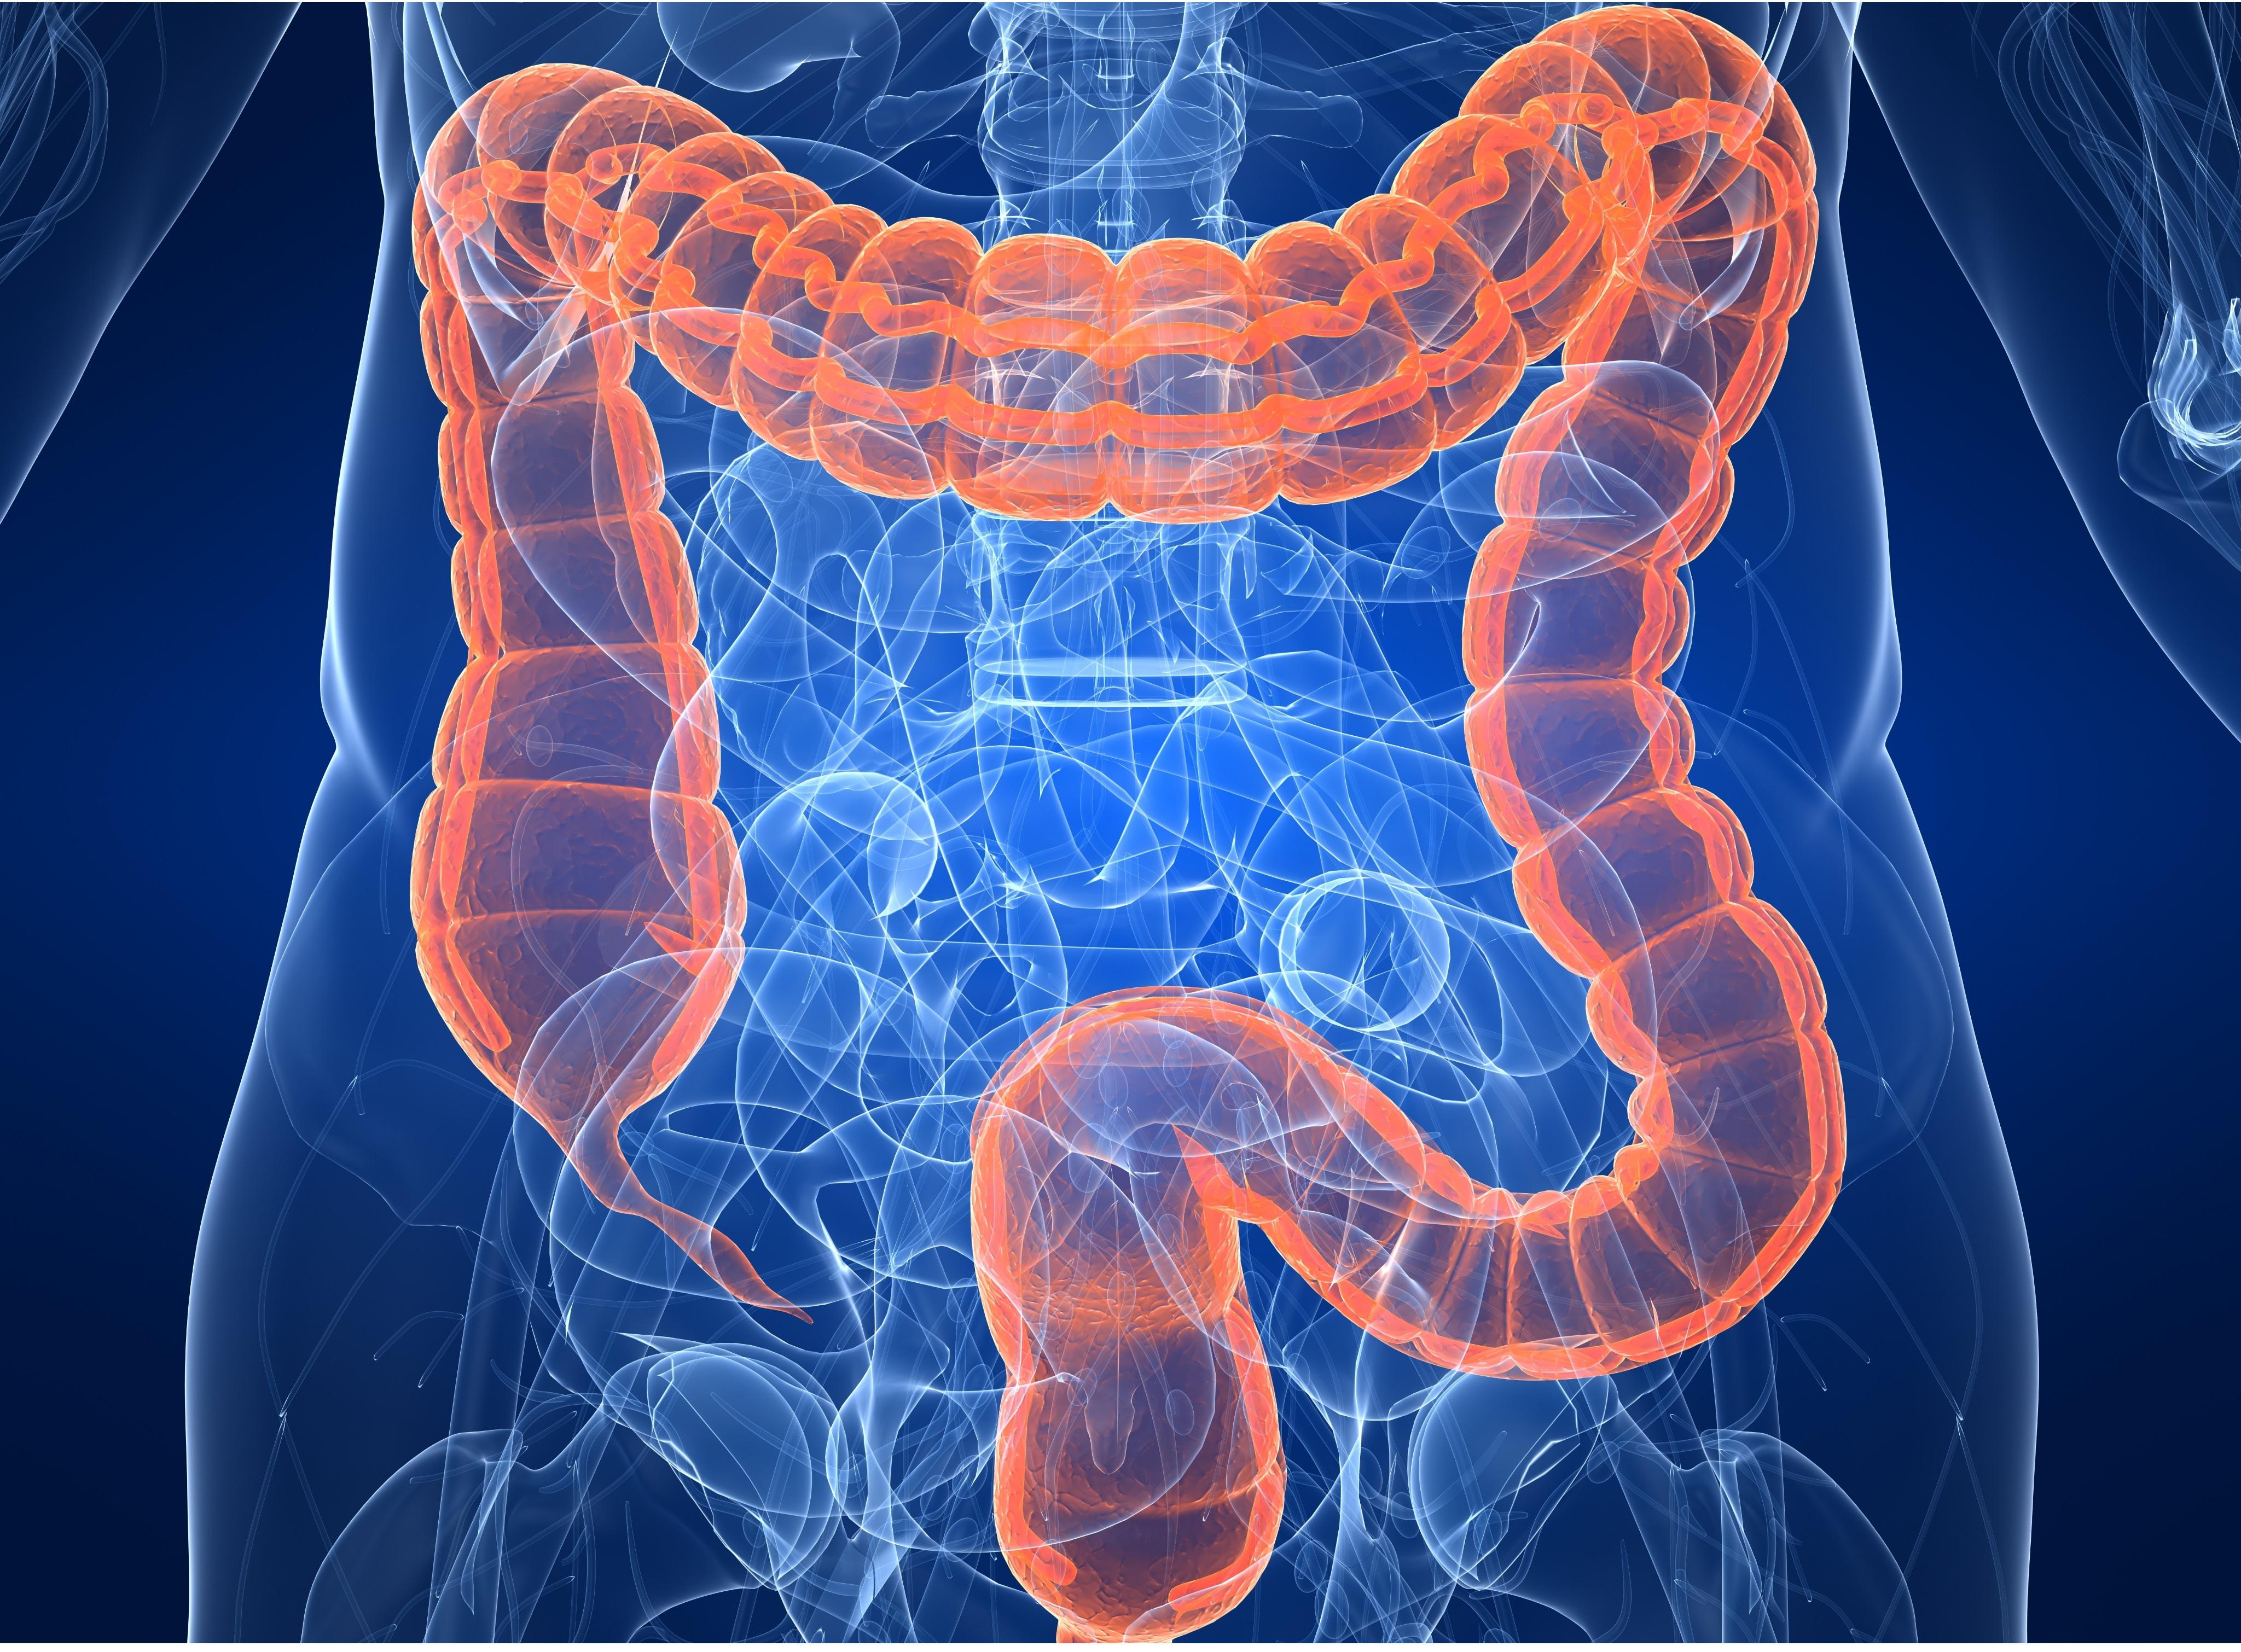 Colon Cancer: Symptoms, Stages, Causes, And Treatment, 46% OFF